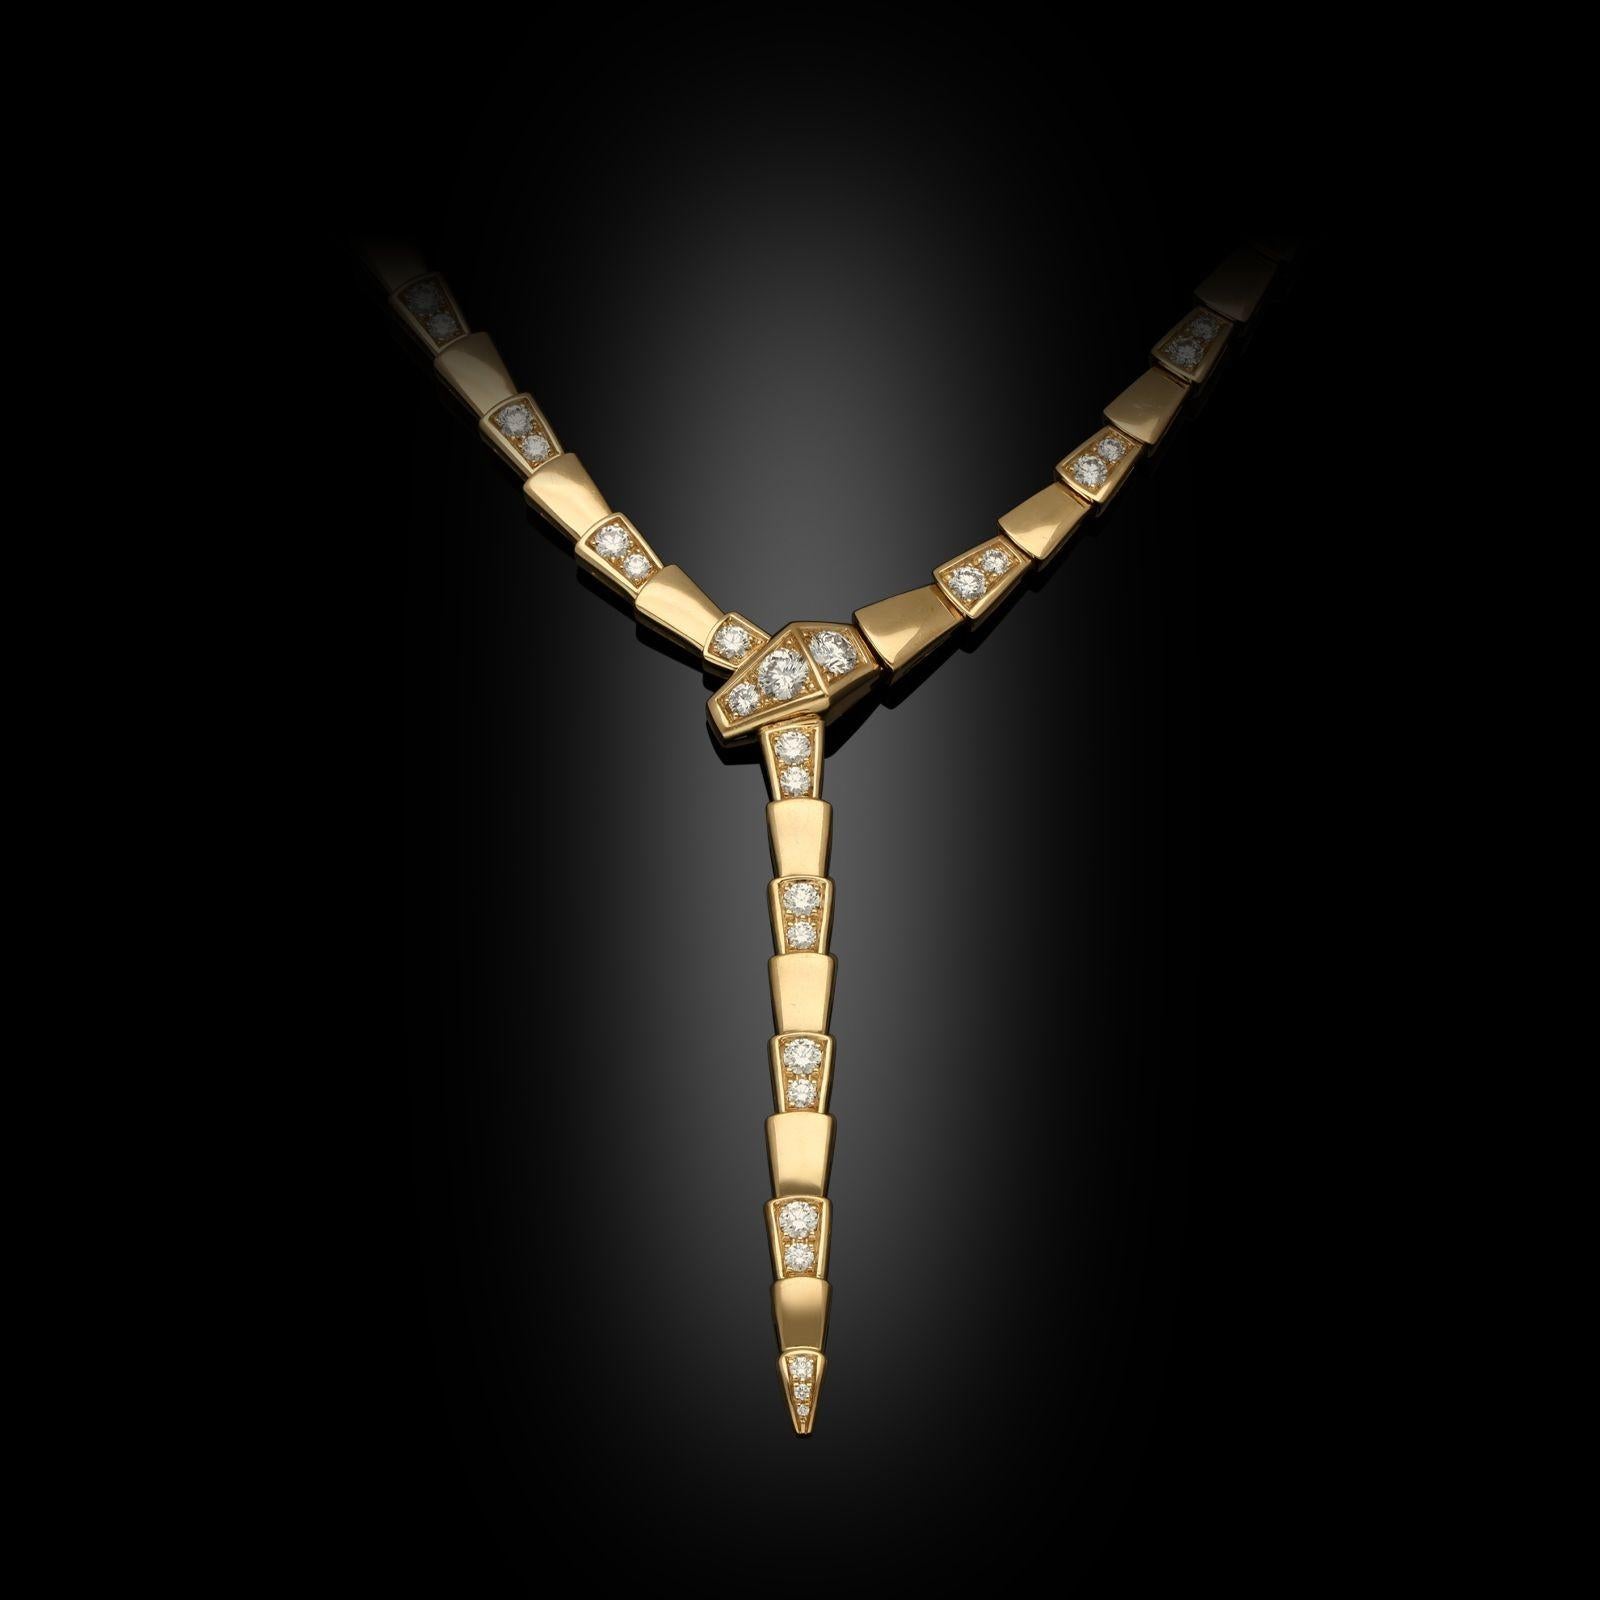 An 18ct rose gold and diamond ‘Serpenti Viper’ necklace by Bulgari, c.2022, this sinuous incarnation of the iconic ‘Serpenti’ motif is designed as a stylised snake encircling the neck and clasping its tail in its mouth, the body with exaggerated